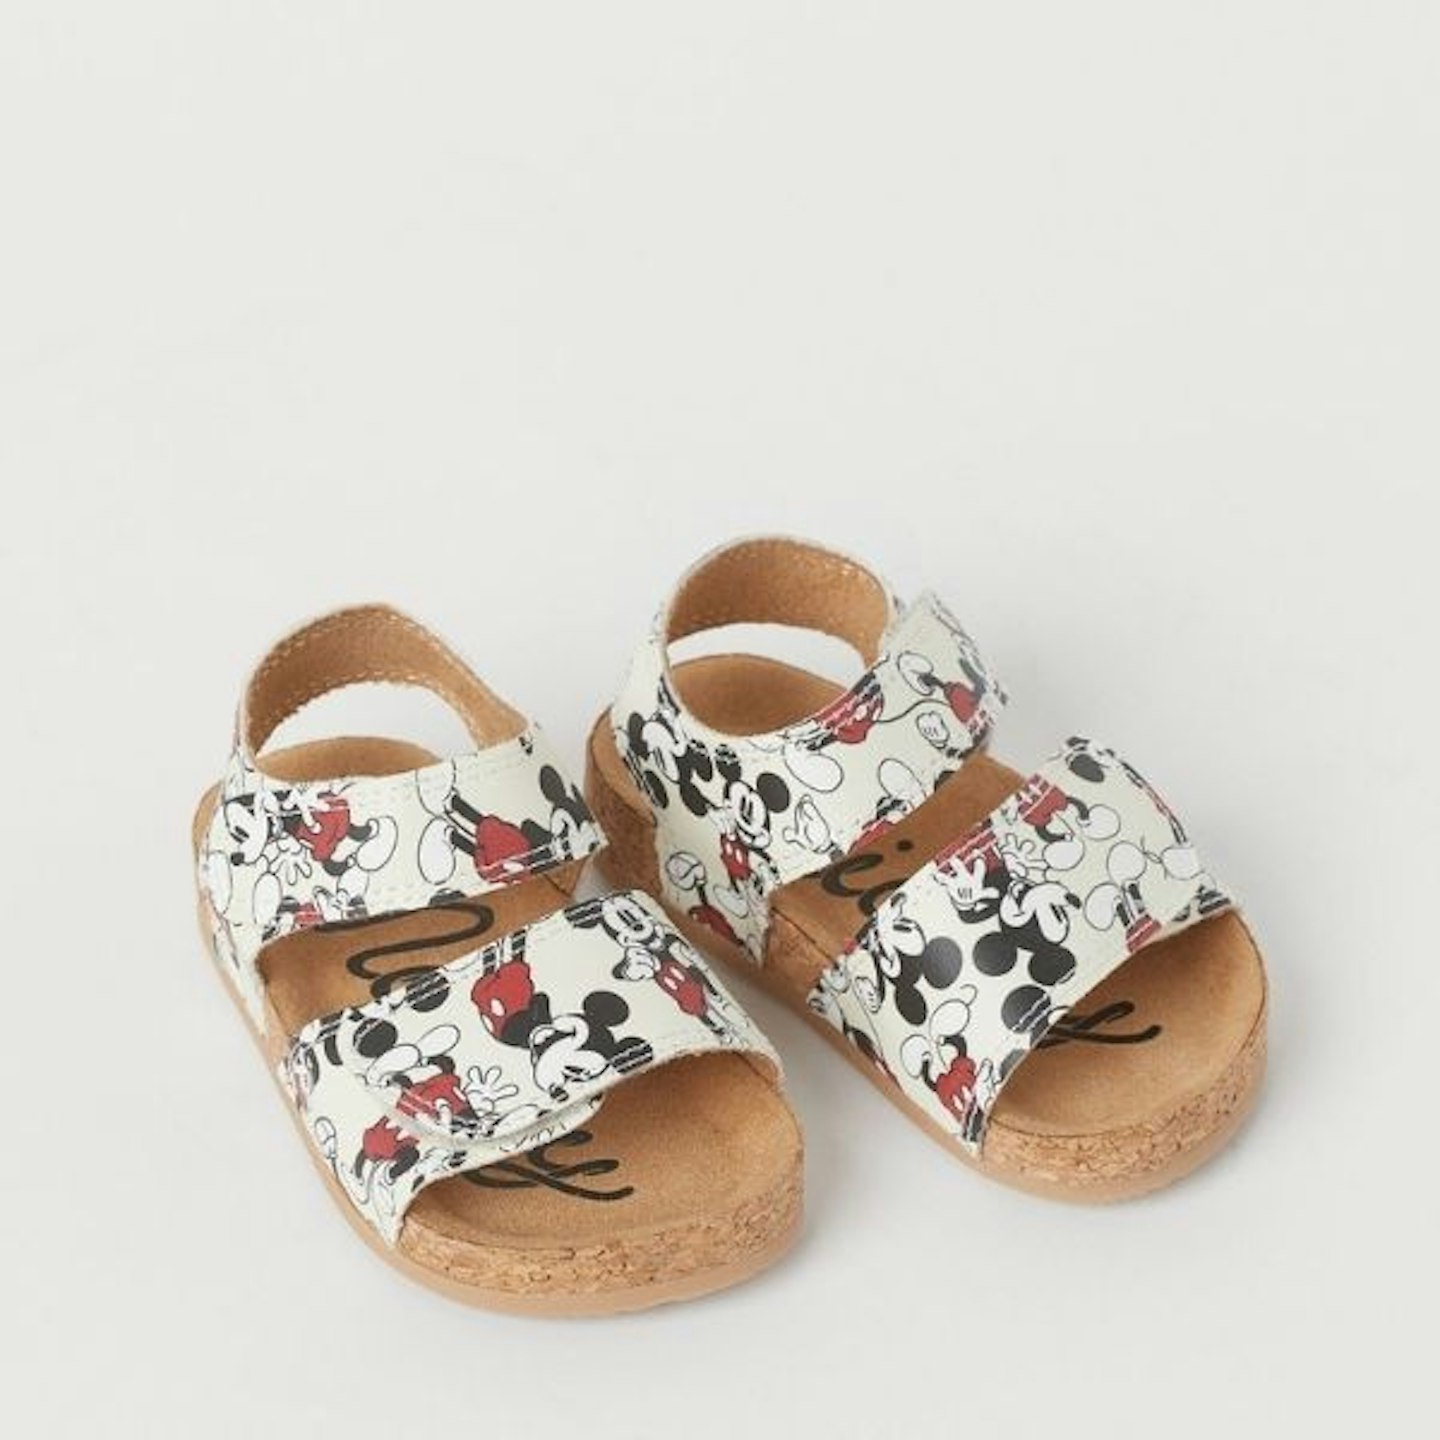 Mickey Mouse Patterned Sandals